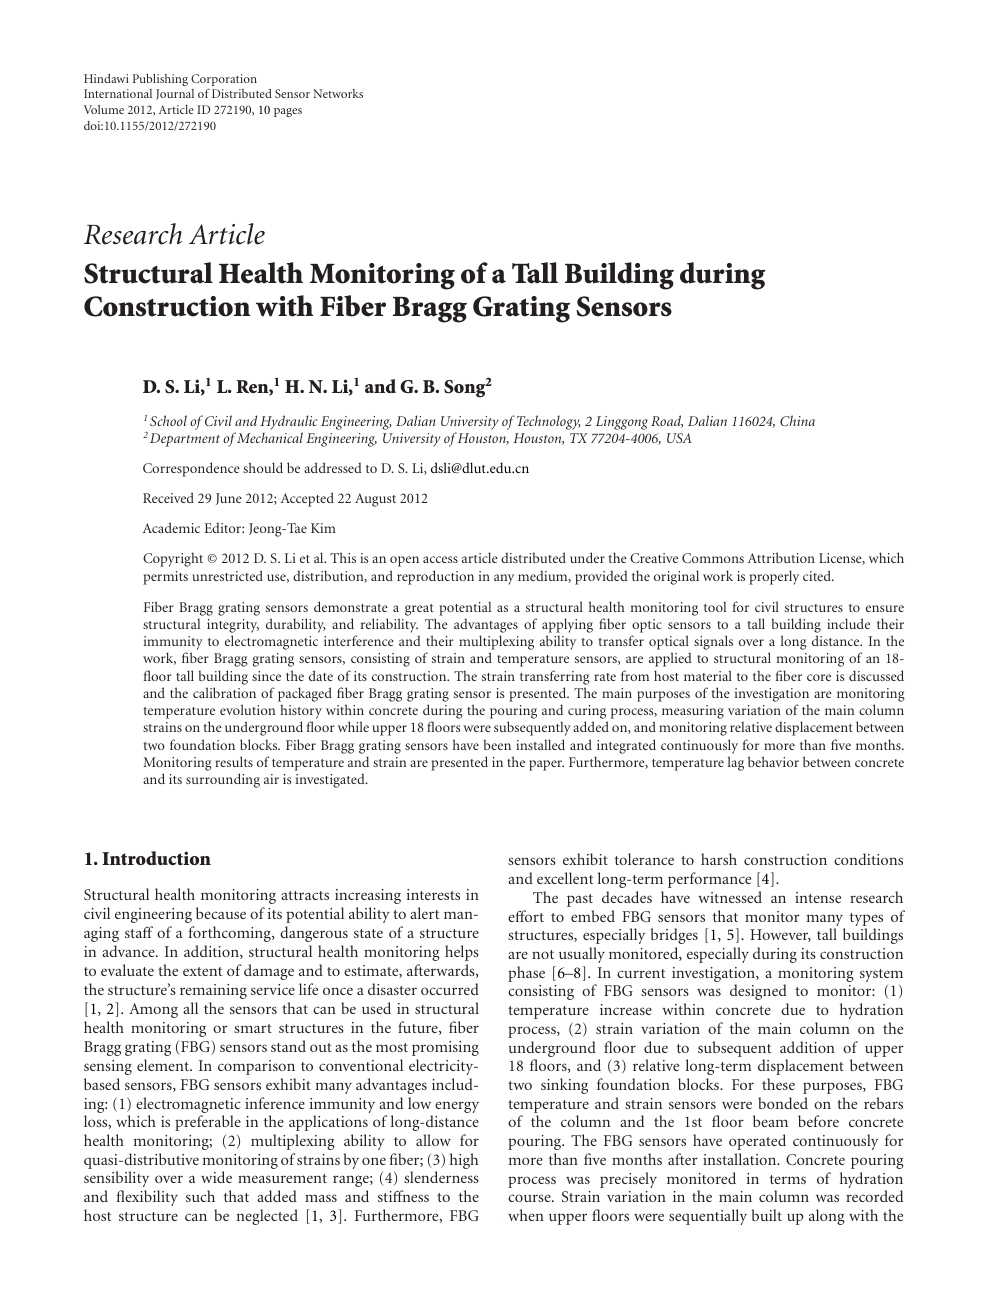 Structural Health Monitoring Of A Tall Building During Construction With Fiber Bragg Grating Sensors Topic Of Research Paper In Civil Engineering Download Scholarly Article Pdf And Read For Free On Cyberleninka